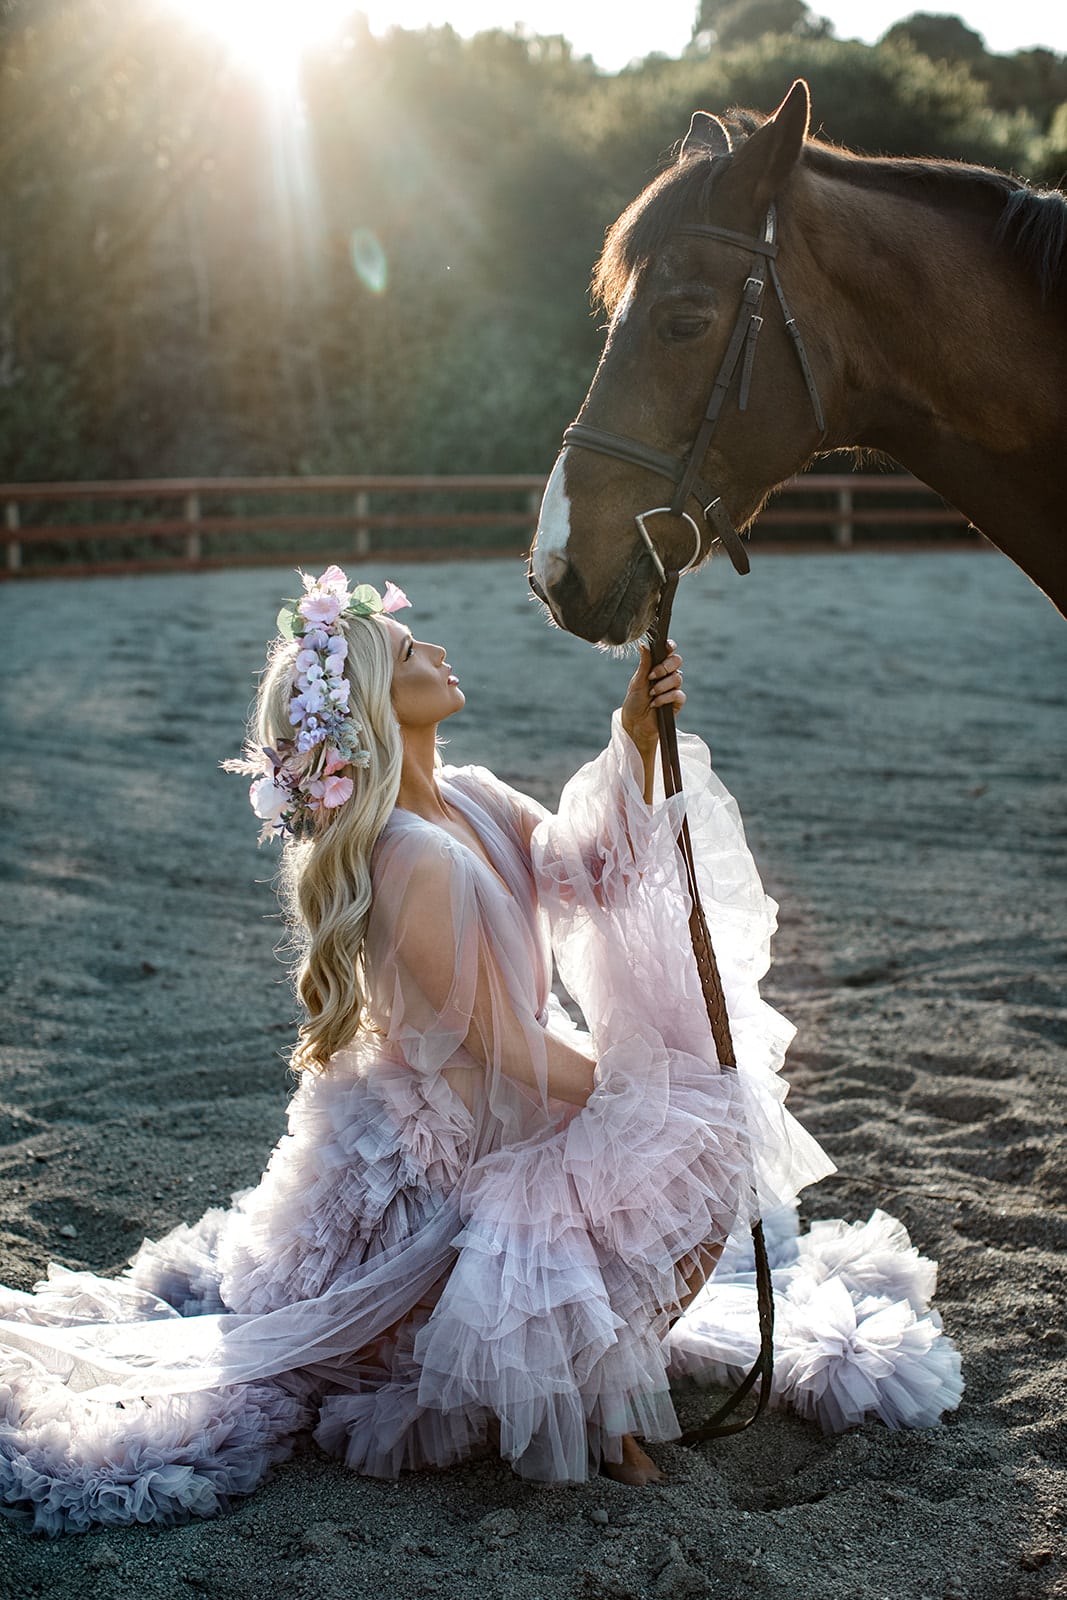 Model sits in lavender bridal robe while holding horse's reins